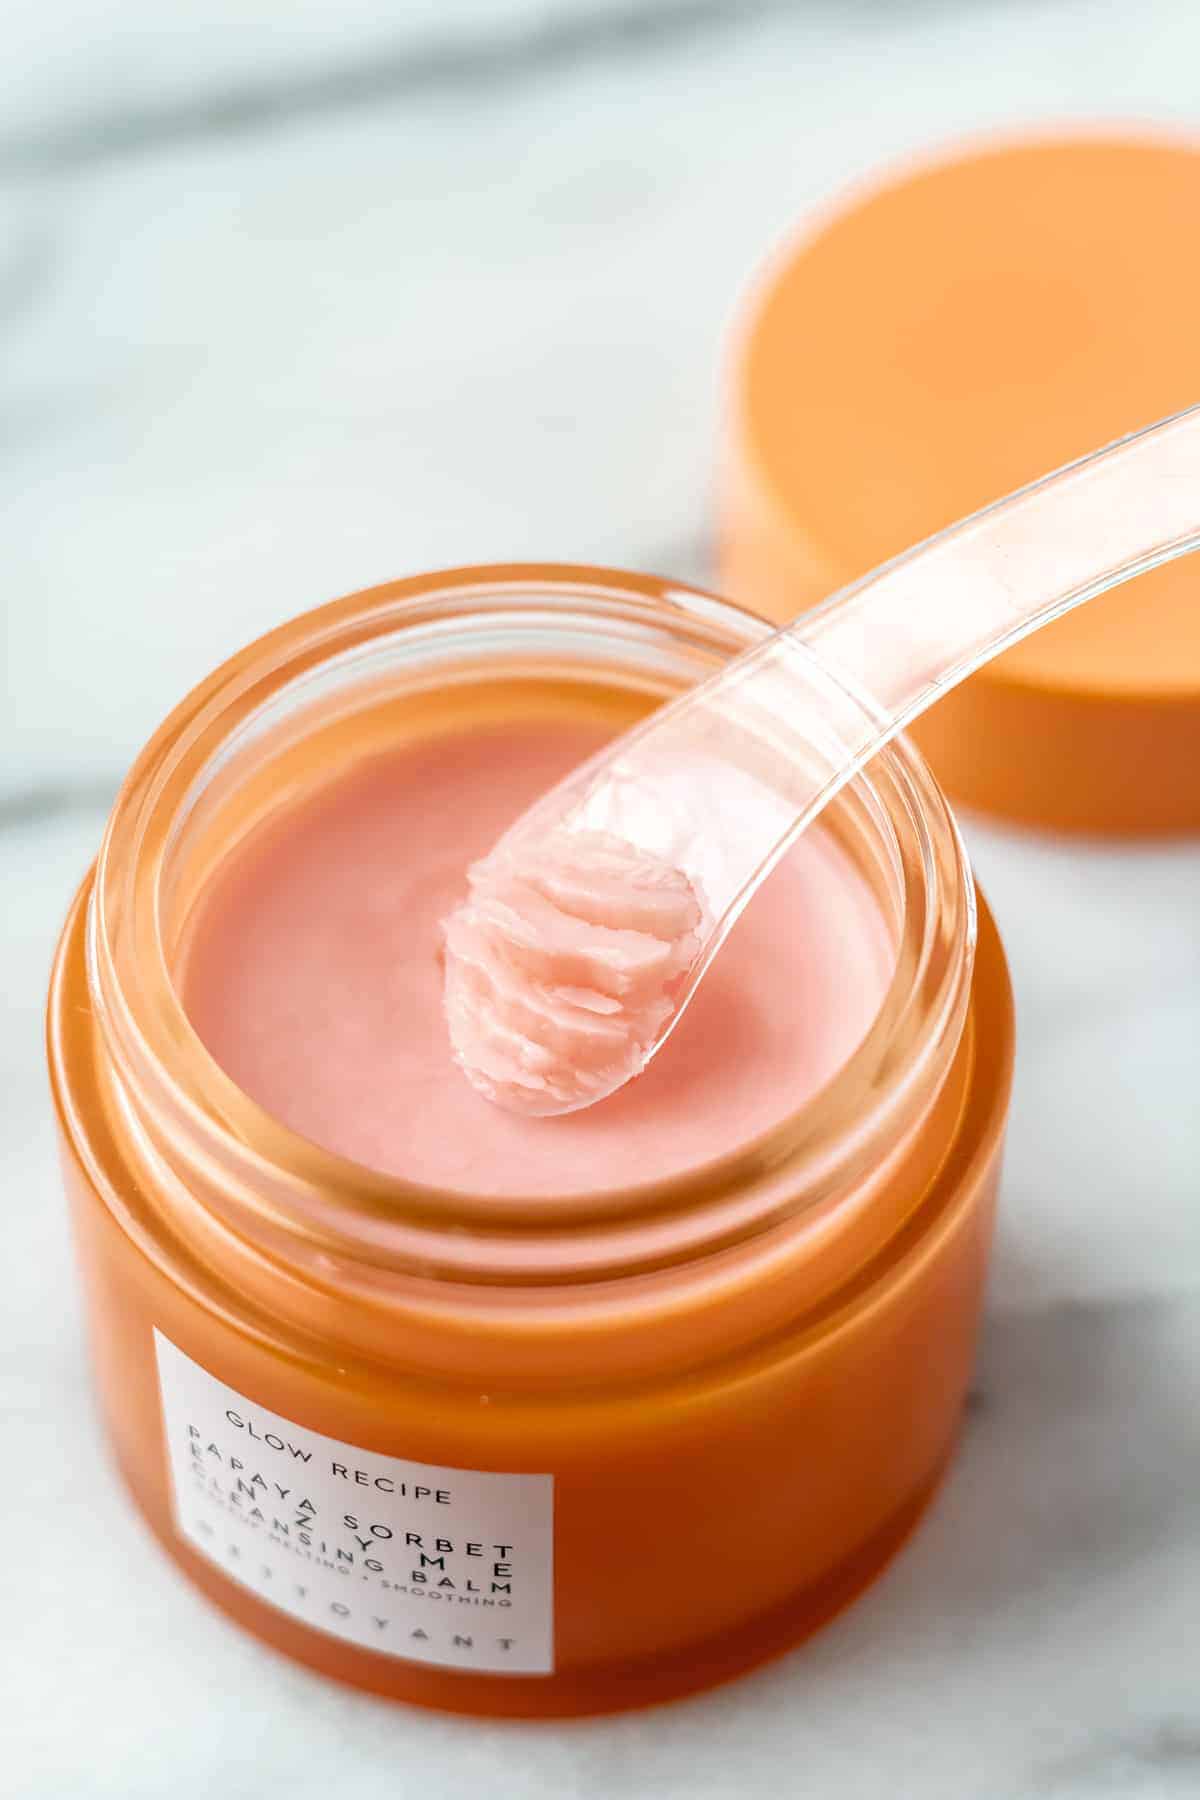 A scoop of Glow Recipe Papaya Enzyme Cleansing Balm on the spatula over the jar